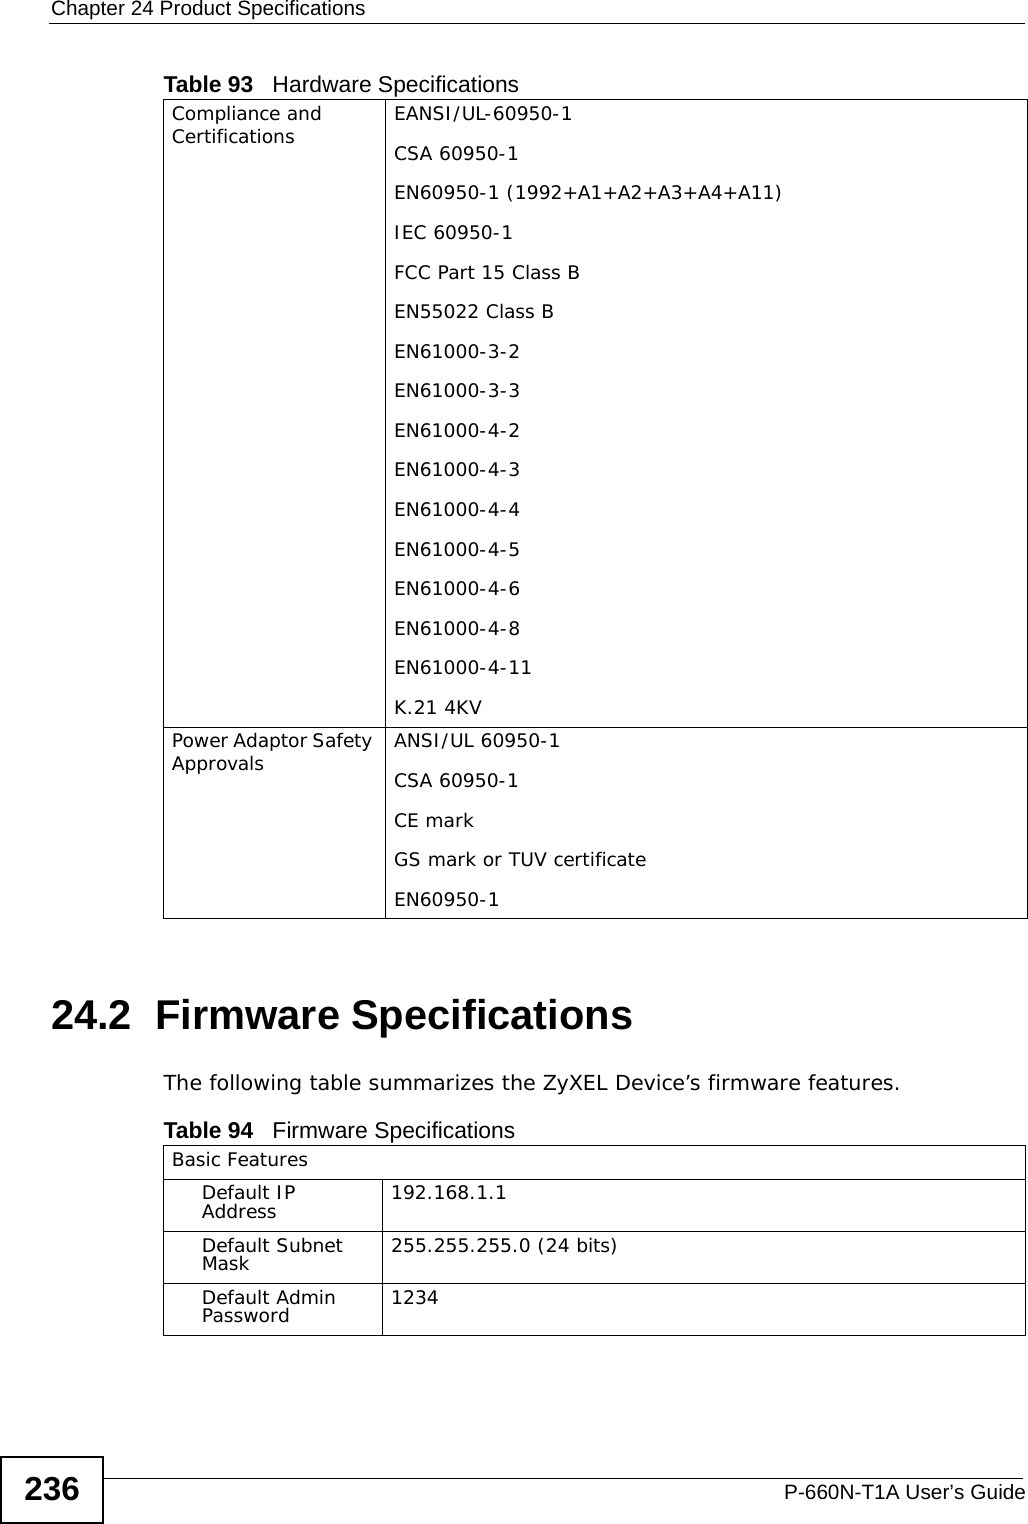 Chapter 24 Product SpecificationsP-660N-T1A User’s Guide23624.2  Firmware SpecificationsThe following table summarizes the ZyXEL Device’s firmware features.Compliance and Certifications EANSI/UL-60950-1CSA 60950-1EN60950-1 (1992+A1+A2+A3+A4+A11)IEC 60950-1FCC Part 15 Class BEN55022 Class BEN61000-3-2EN61000-3-3EN61000-4-2EN61000-4-3EN61000-4-4EN61000-4-5EN61000-4-6EN61000-4-8EN61000-4-11K.21 4KVPower Adaptor Safety Approvals ANSI/UL 60950-1CSA 60950-1CE markGS mark or TUV certificateEN60950-1Table 93   Hardware SpecificationsTable 94   Firmware Specifications Basic FeaturesDefault IP Address 192.168.1.1Default Subnet Mask 255.255.255.0 (24 bits)Default Admin Password 1234